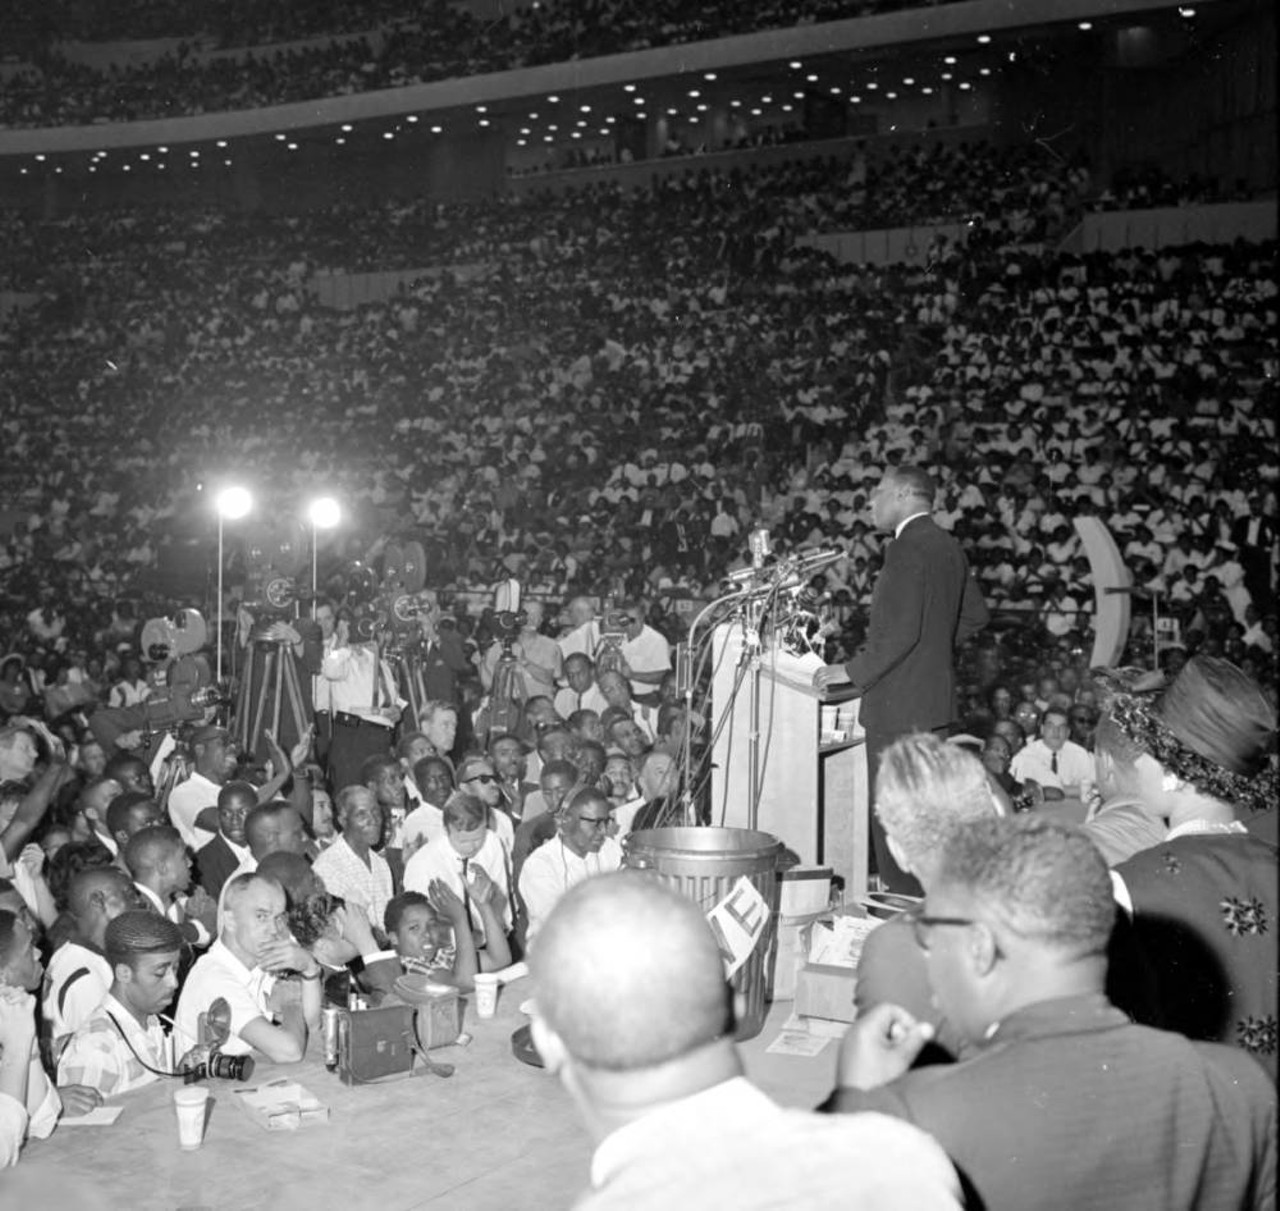 Photos of Dr. Martin Luther King Jr.’s 1963 Detroit ‘Walk to Freedom’